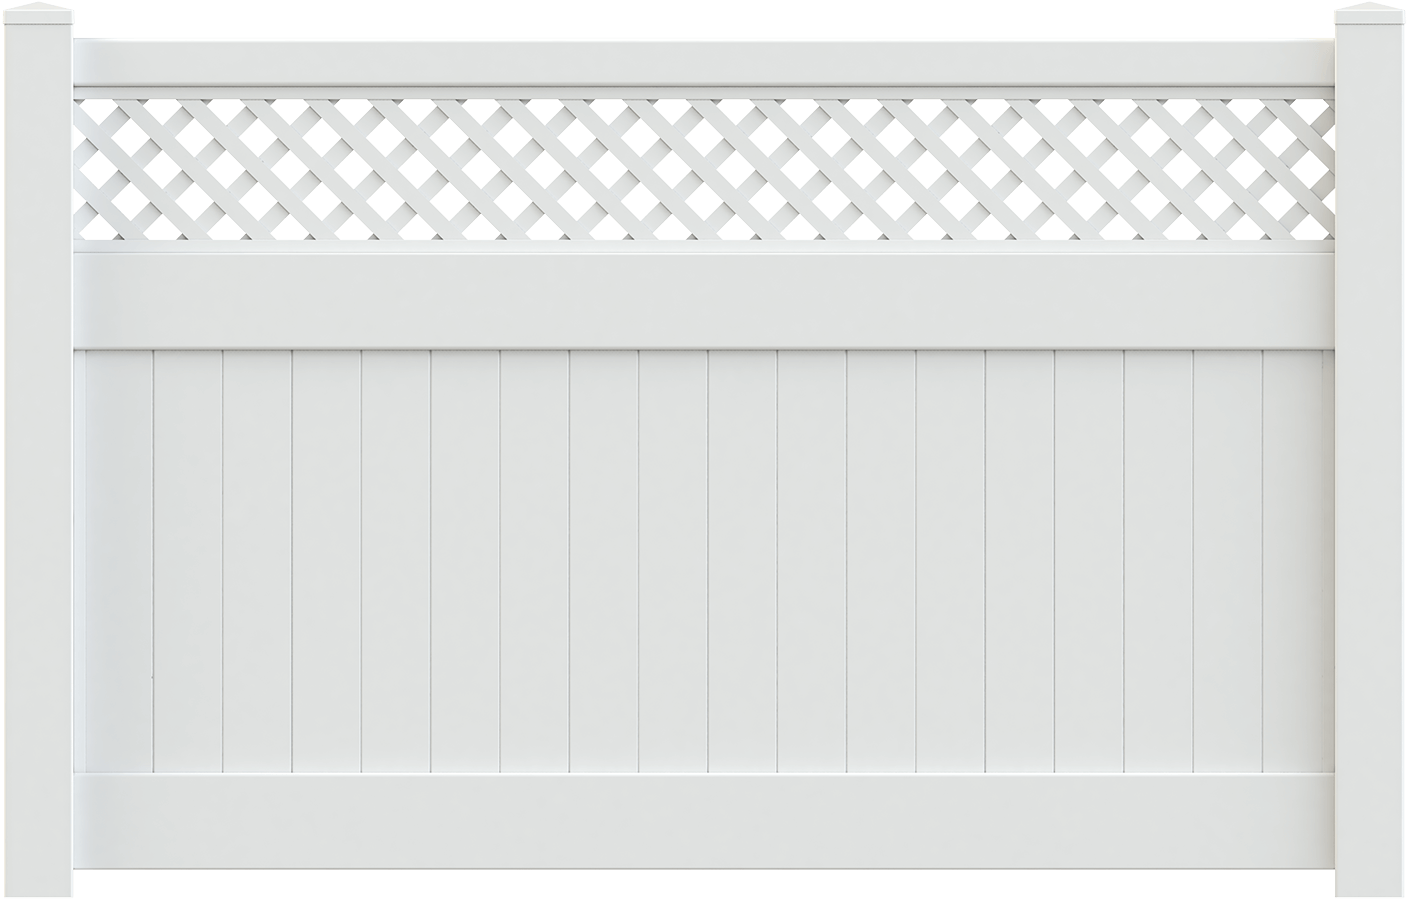 A White Fence With A Lattice Pattern